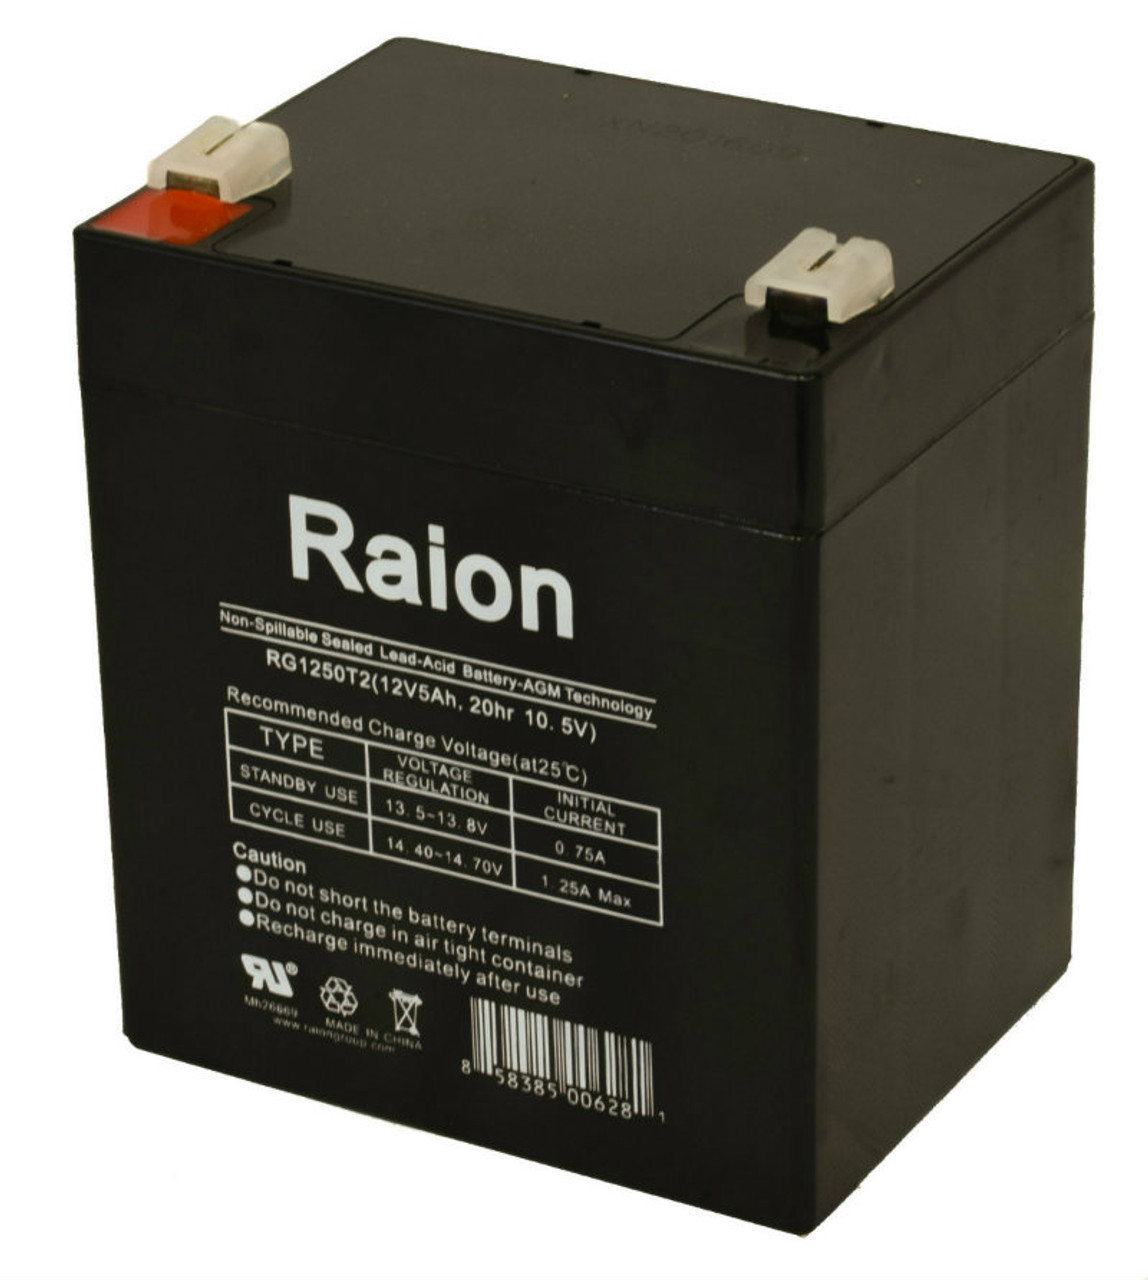 Raion Power 12V 5Ah Replacement Fire Alarm Control Panel Battery for ADT Security Alarm